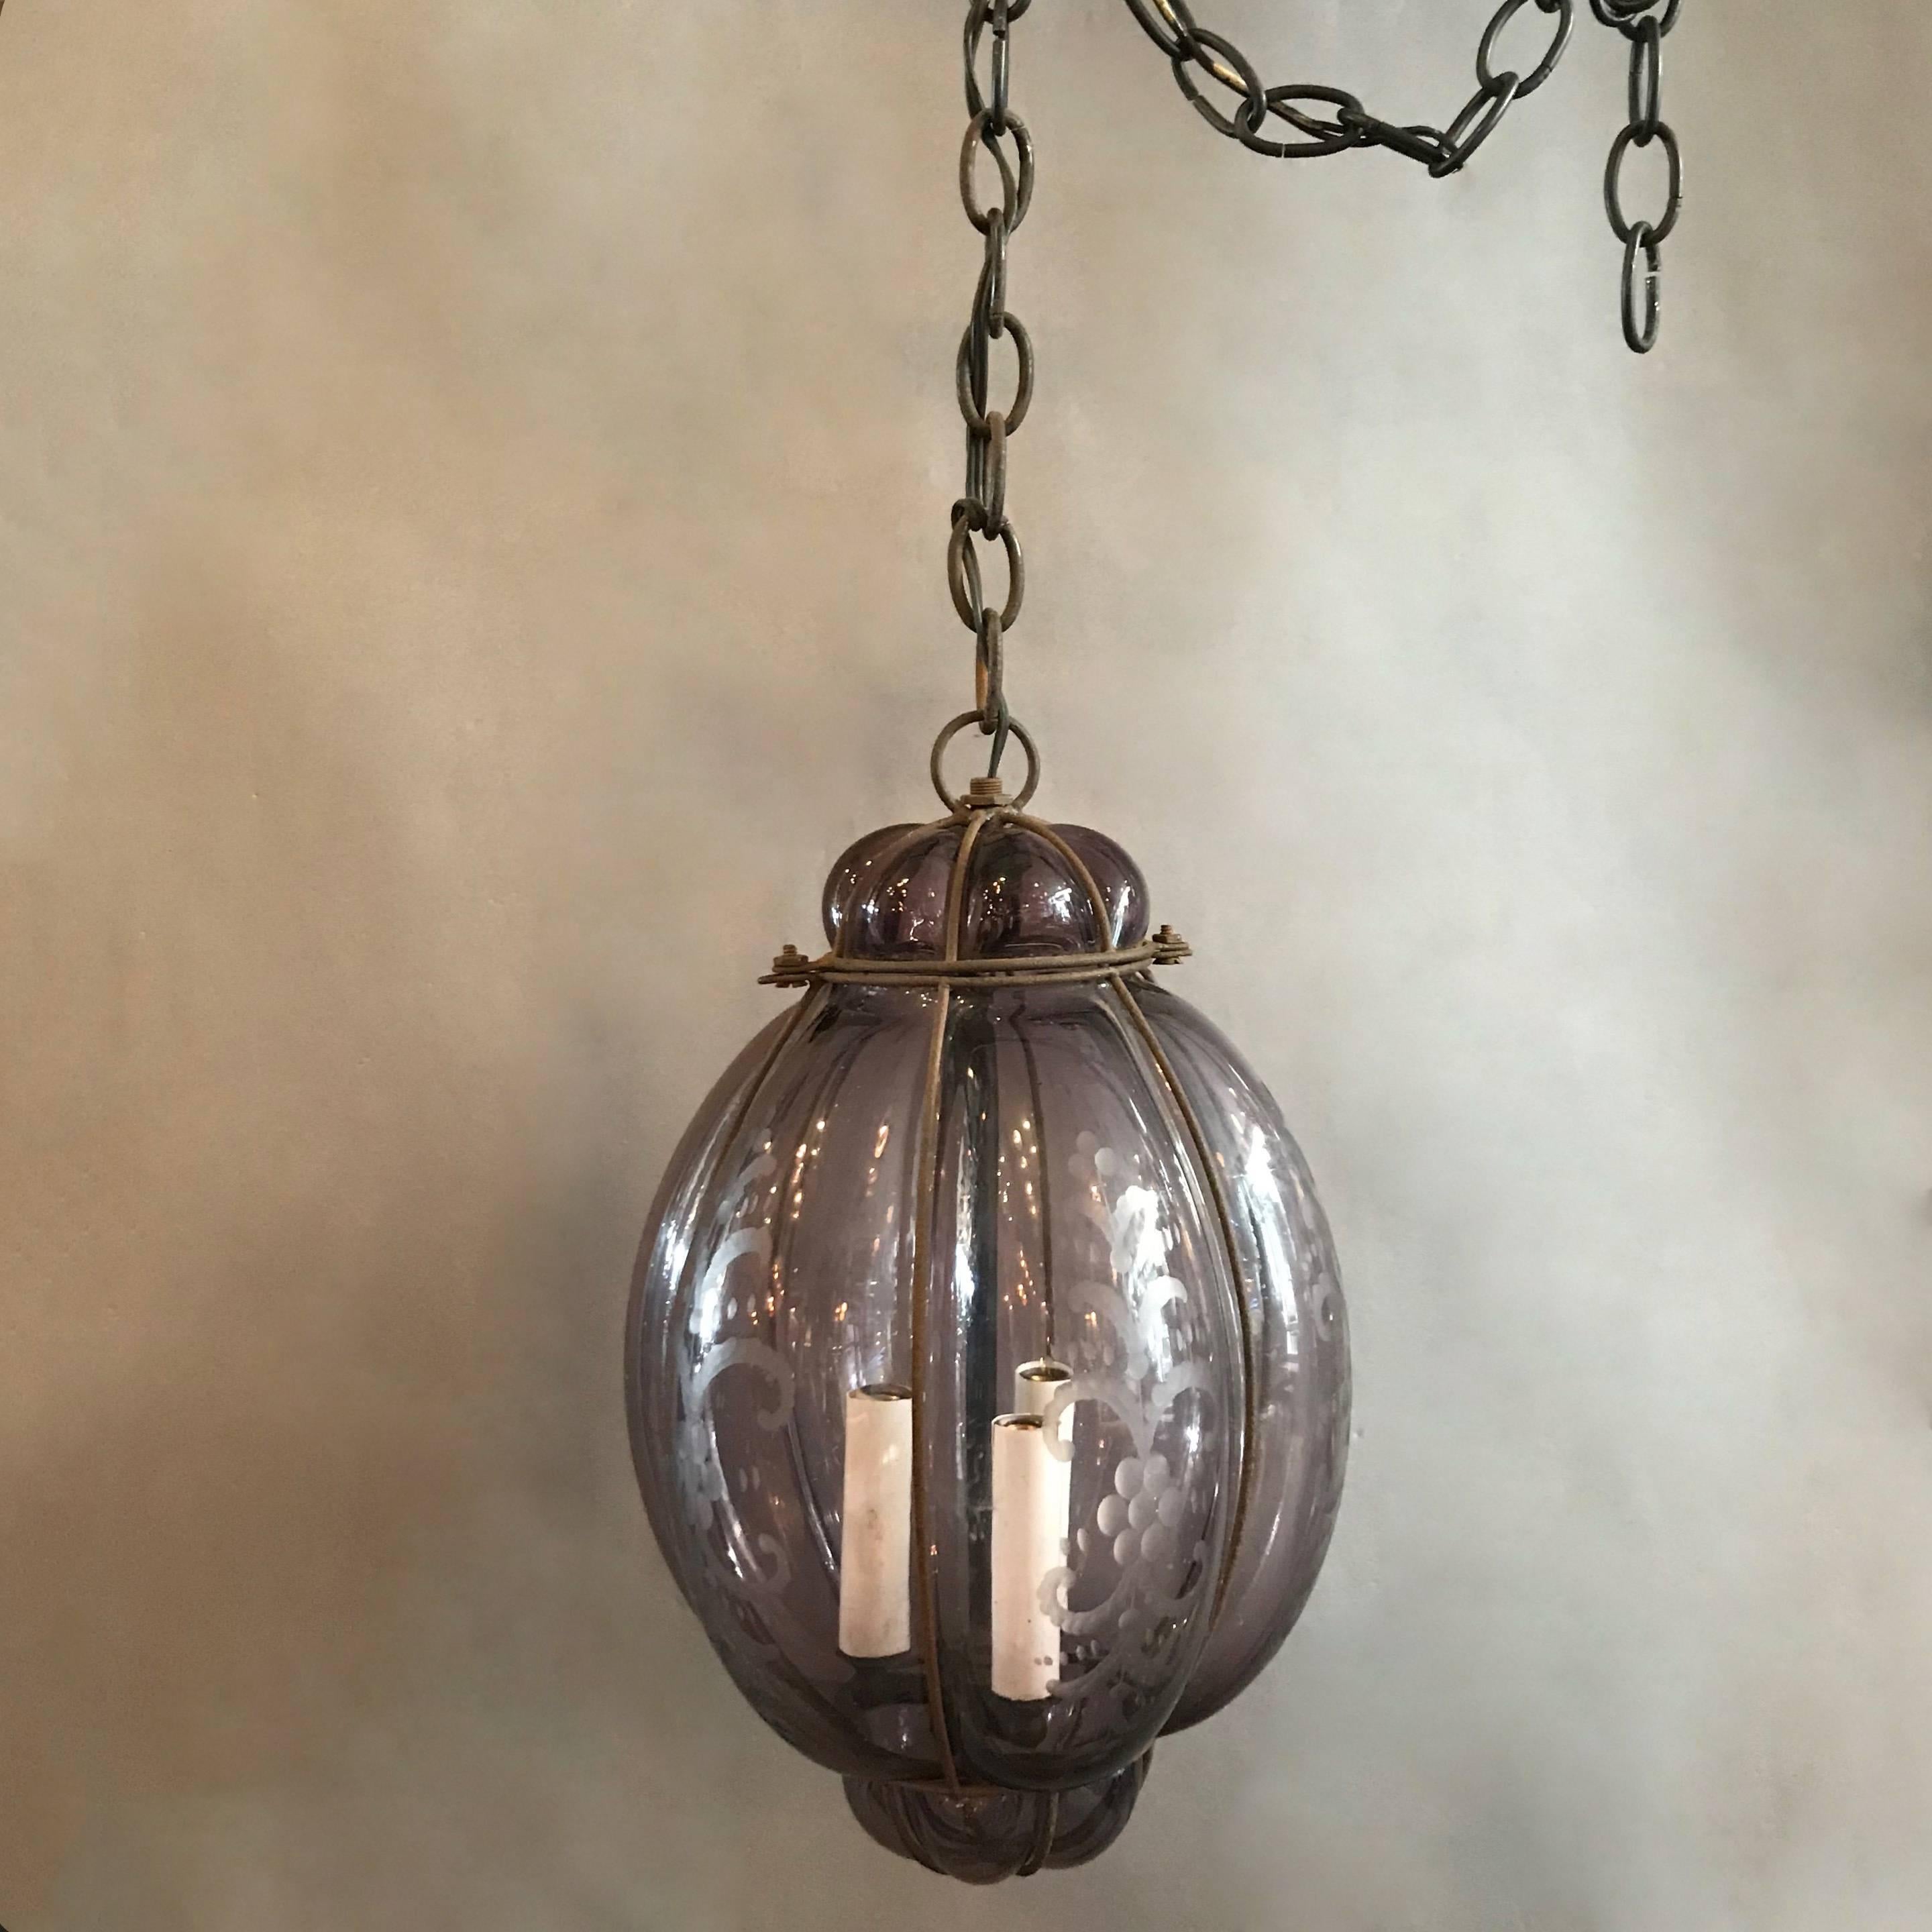 Italian, amethyst colored, Seguso, Murano glass pendant light, handblown within an iron cage features three candelabra bulbs that can accept 40 watt bulbs each on 24 in of chain.